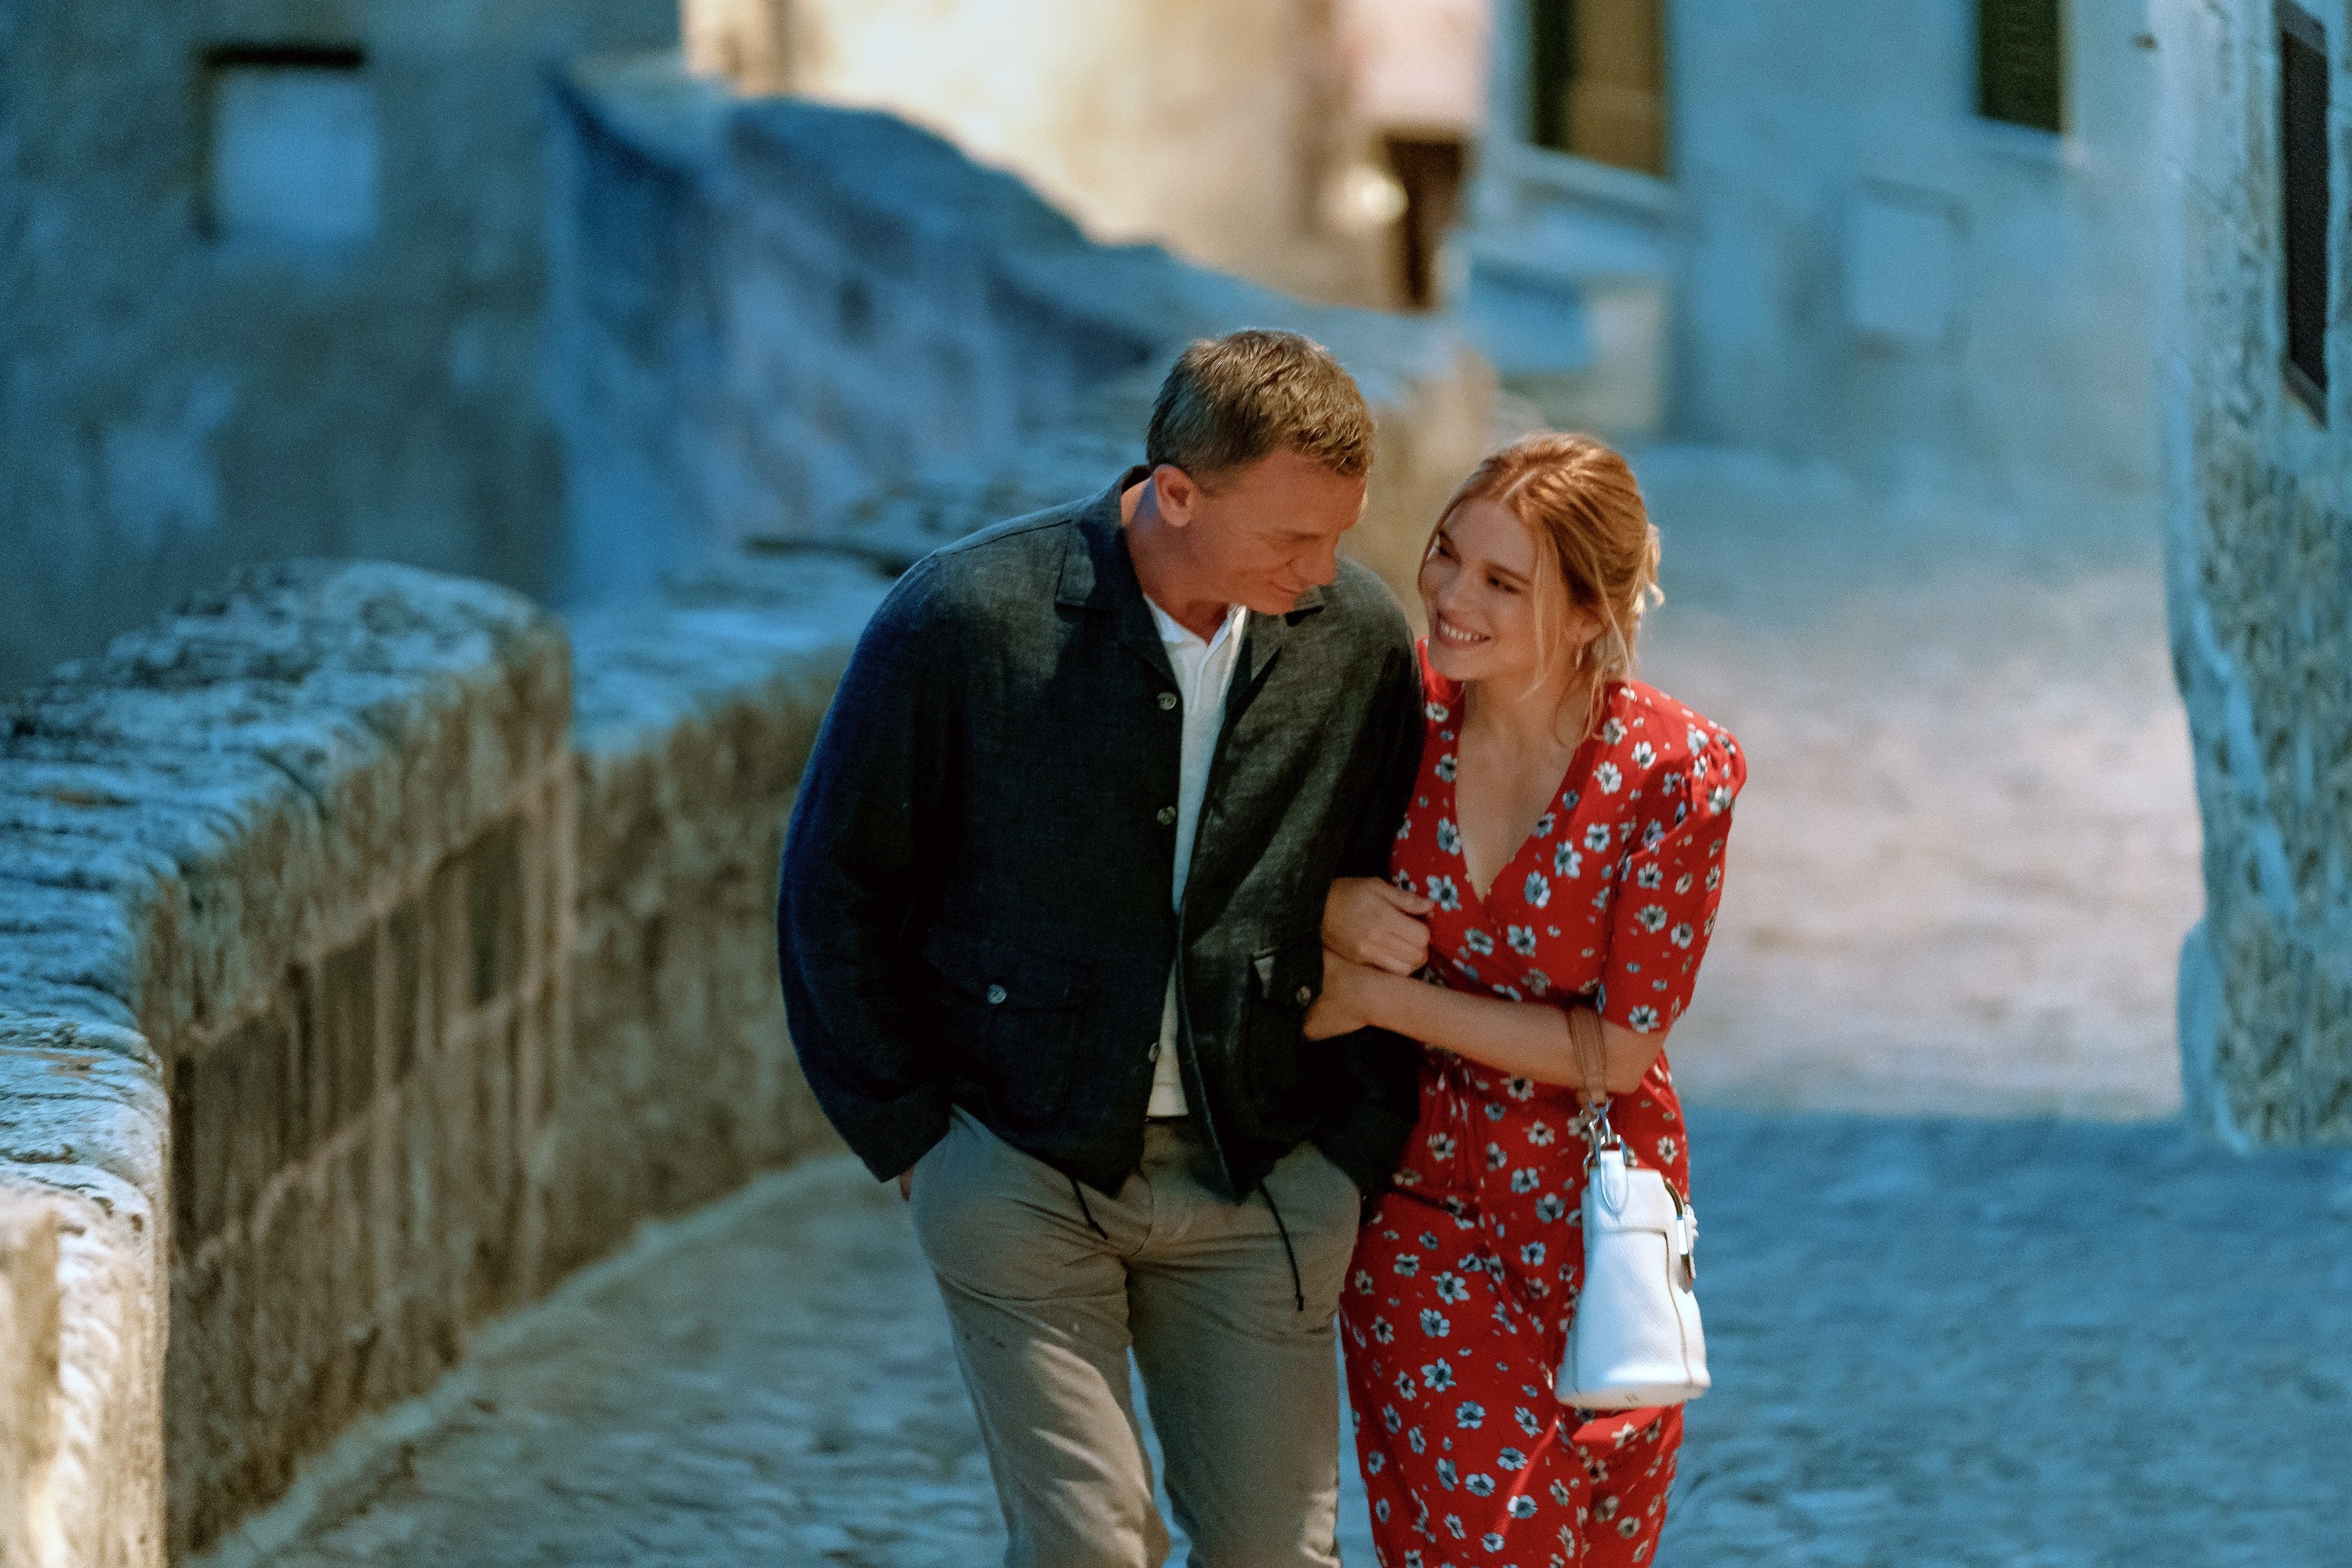 Daniel Craig and Lea Seydoux in No Time to Die, which earned $774 million at the box office.